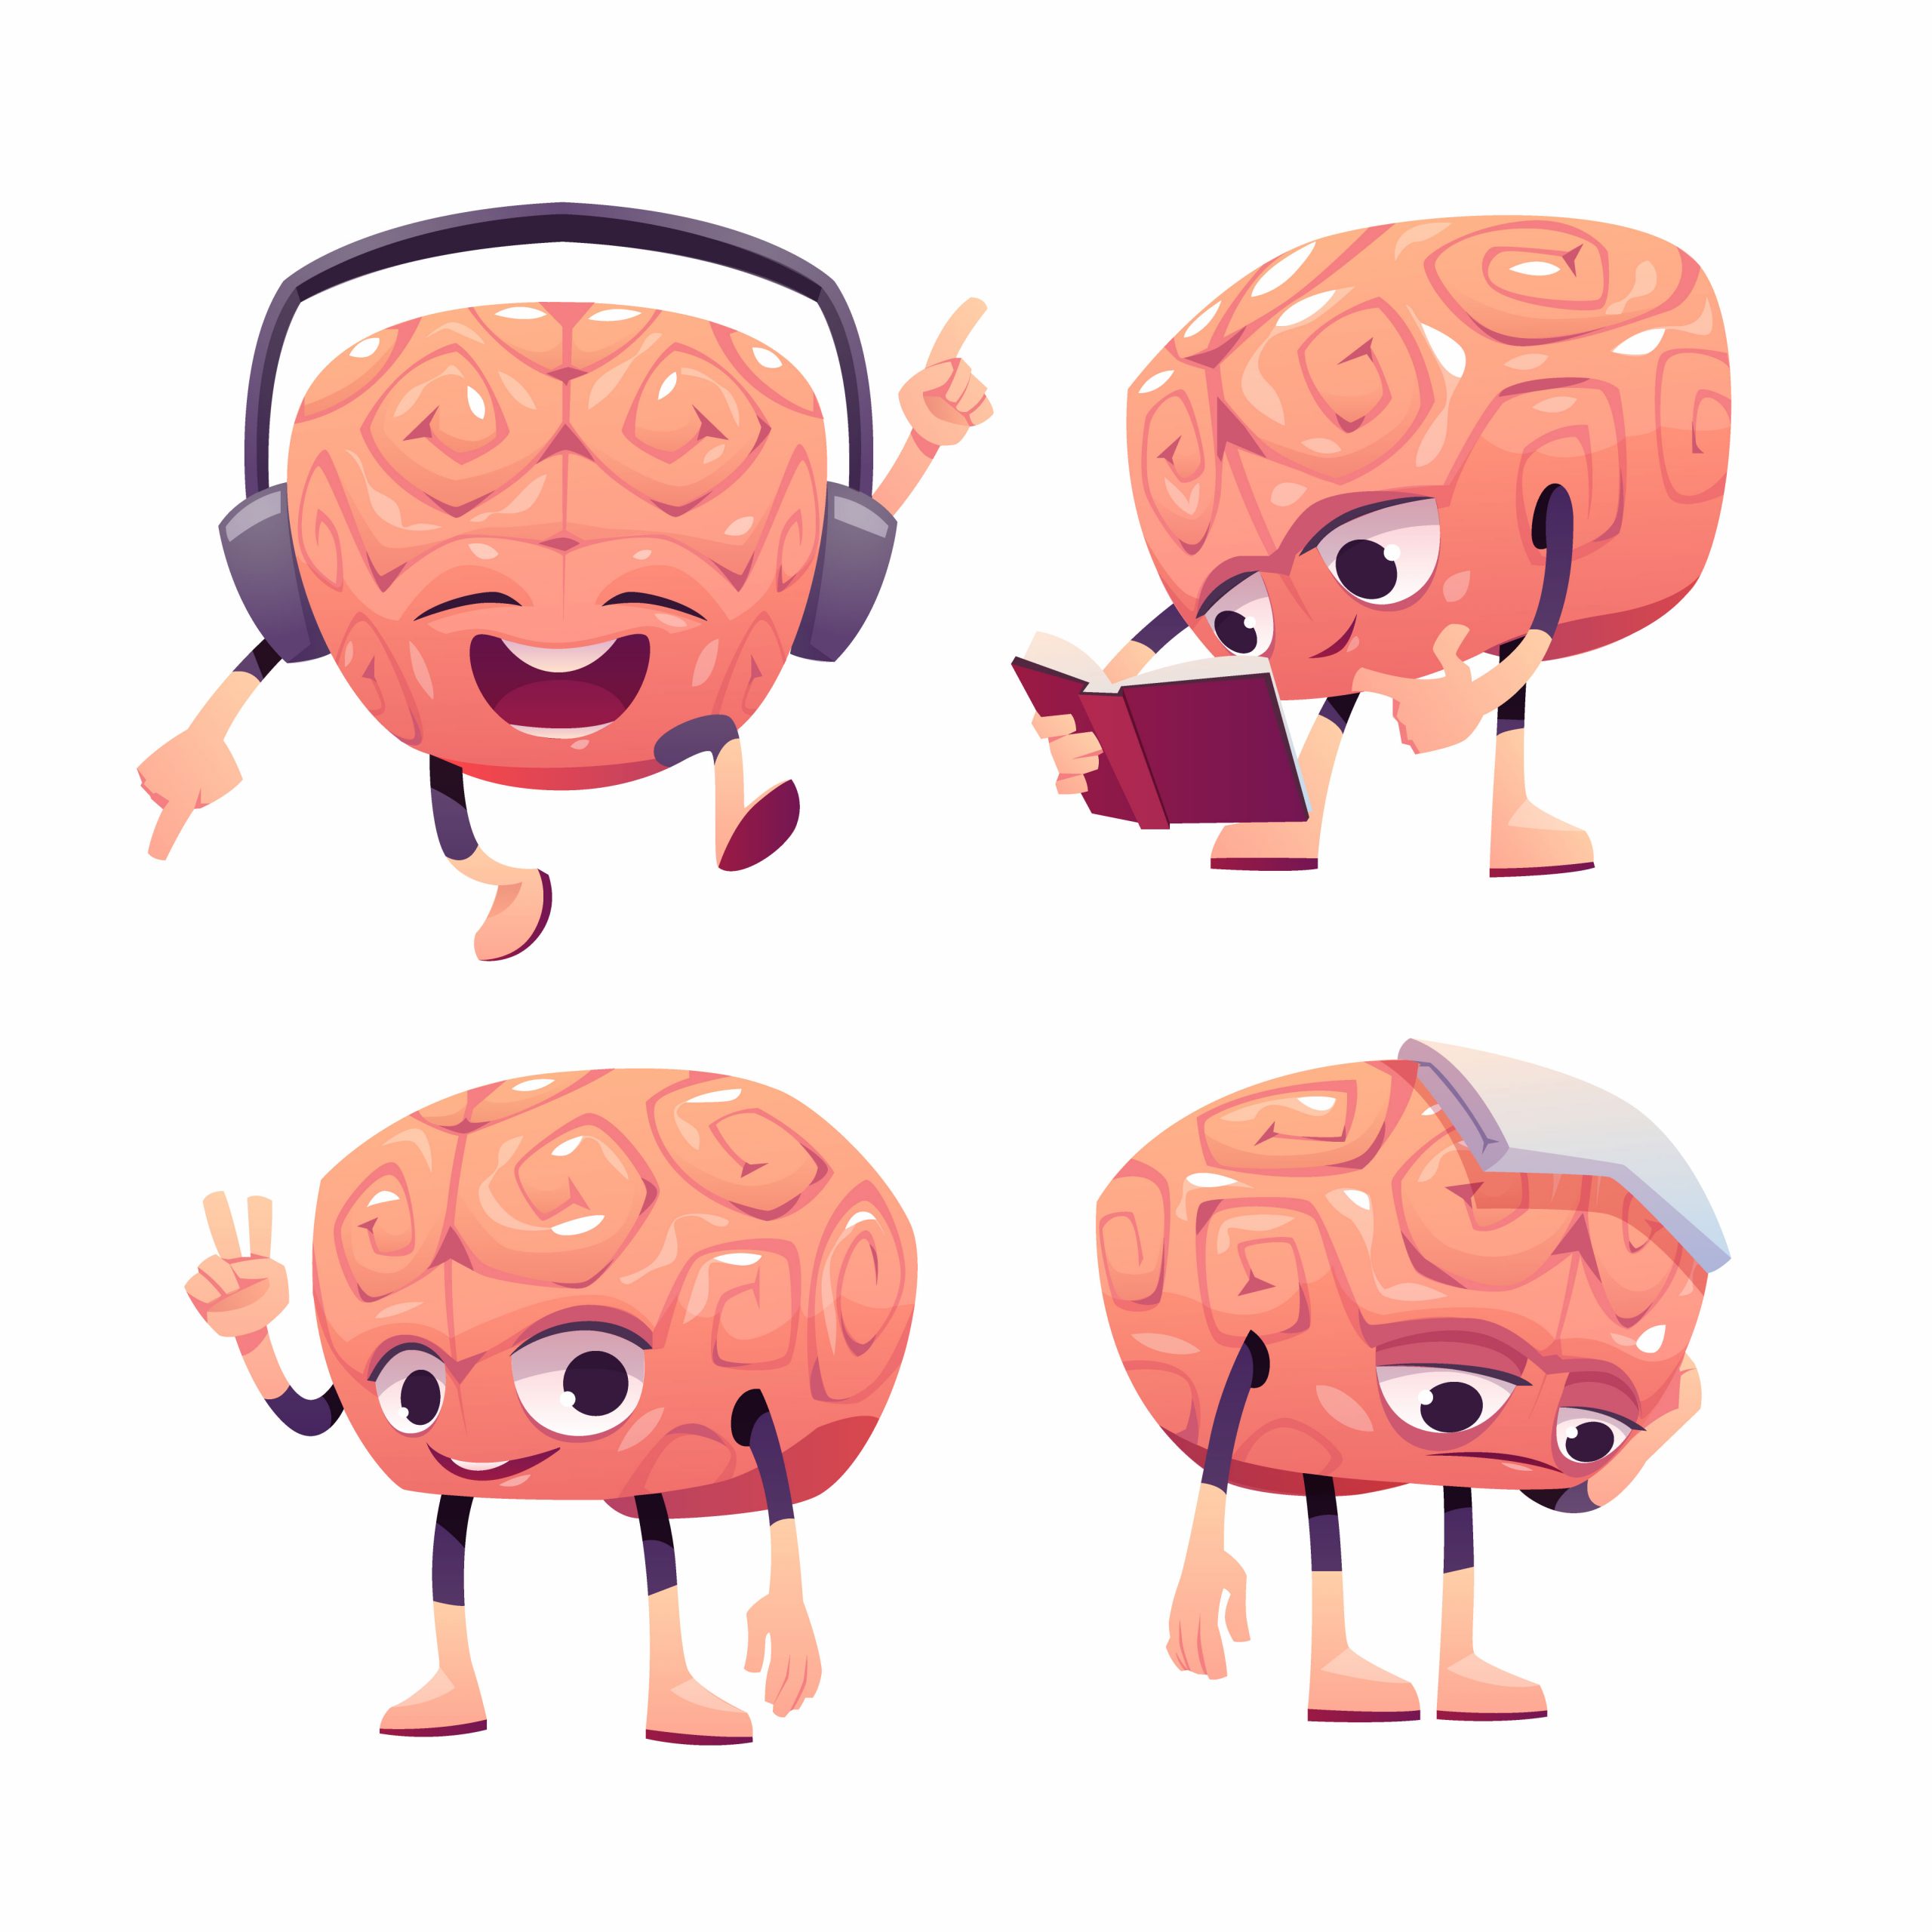 classical music affects the brain